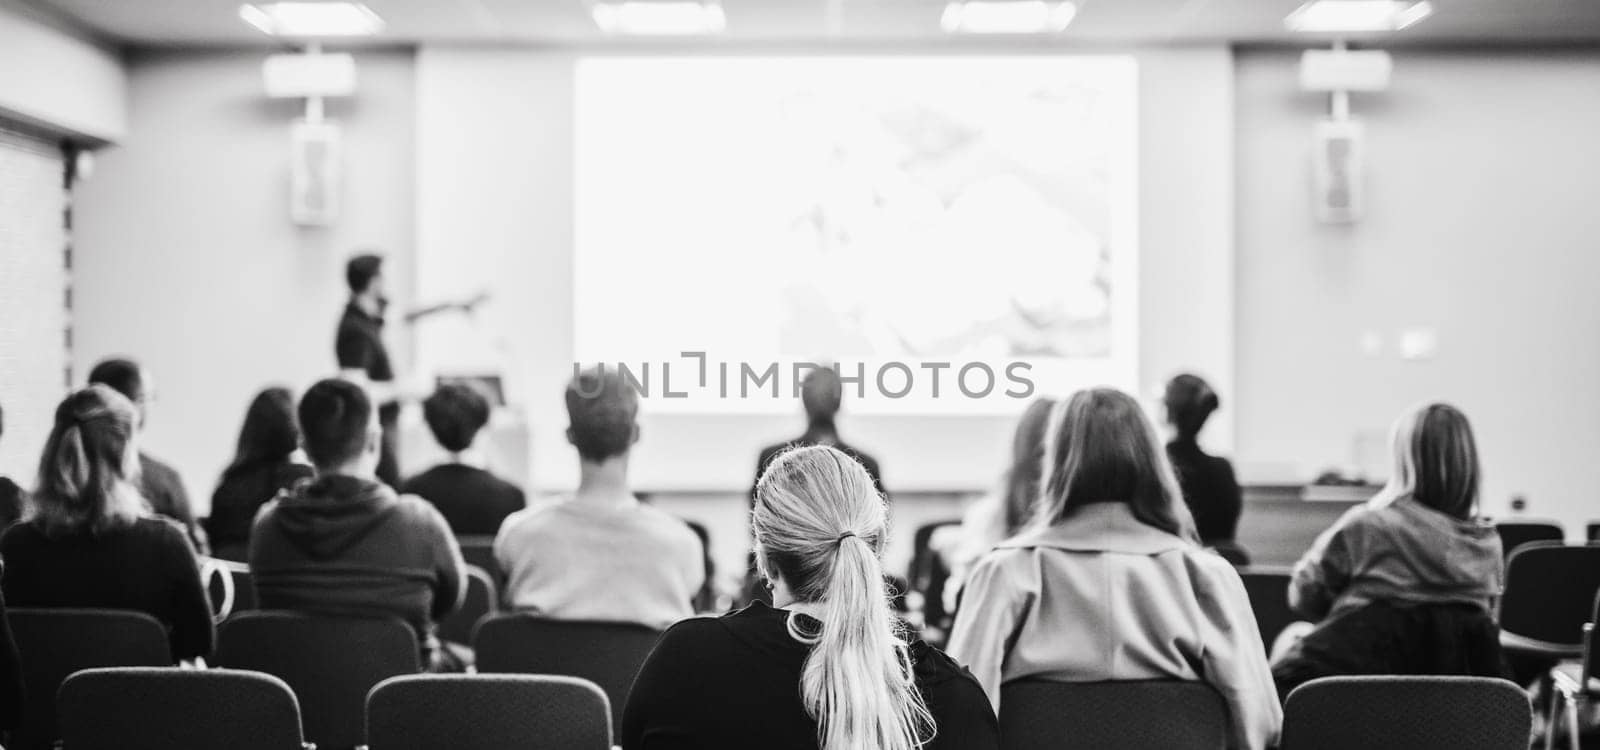 Speaker giving a talk in conference hall at business event. Rear view of unrecognizable people in audience at the conference hall. Business and entrepreneurship concept. Blue tones black and white image